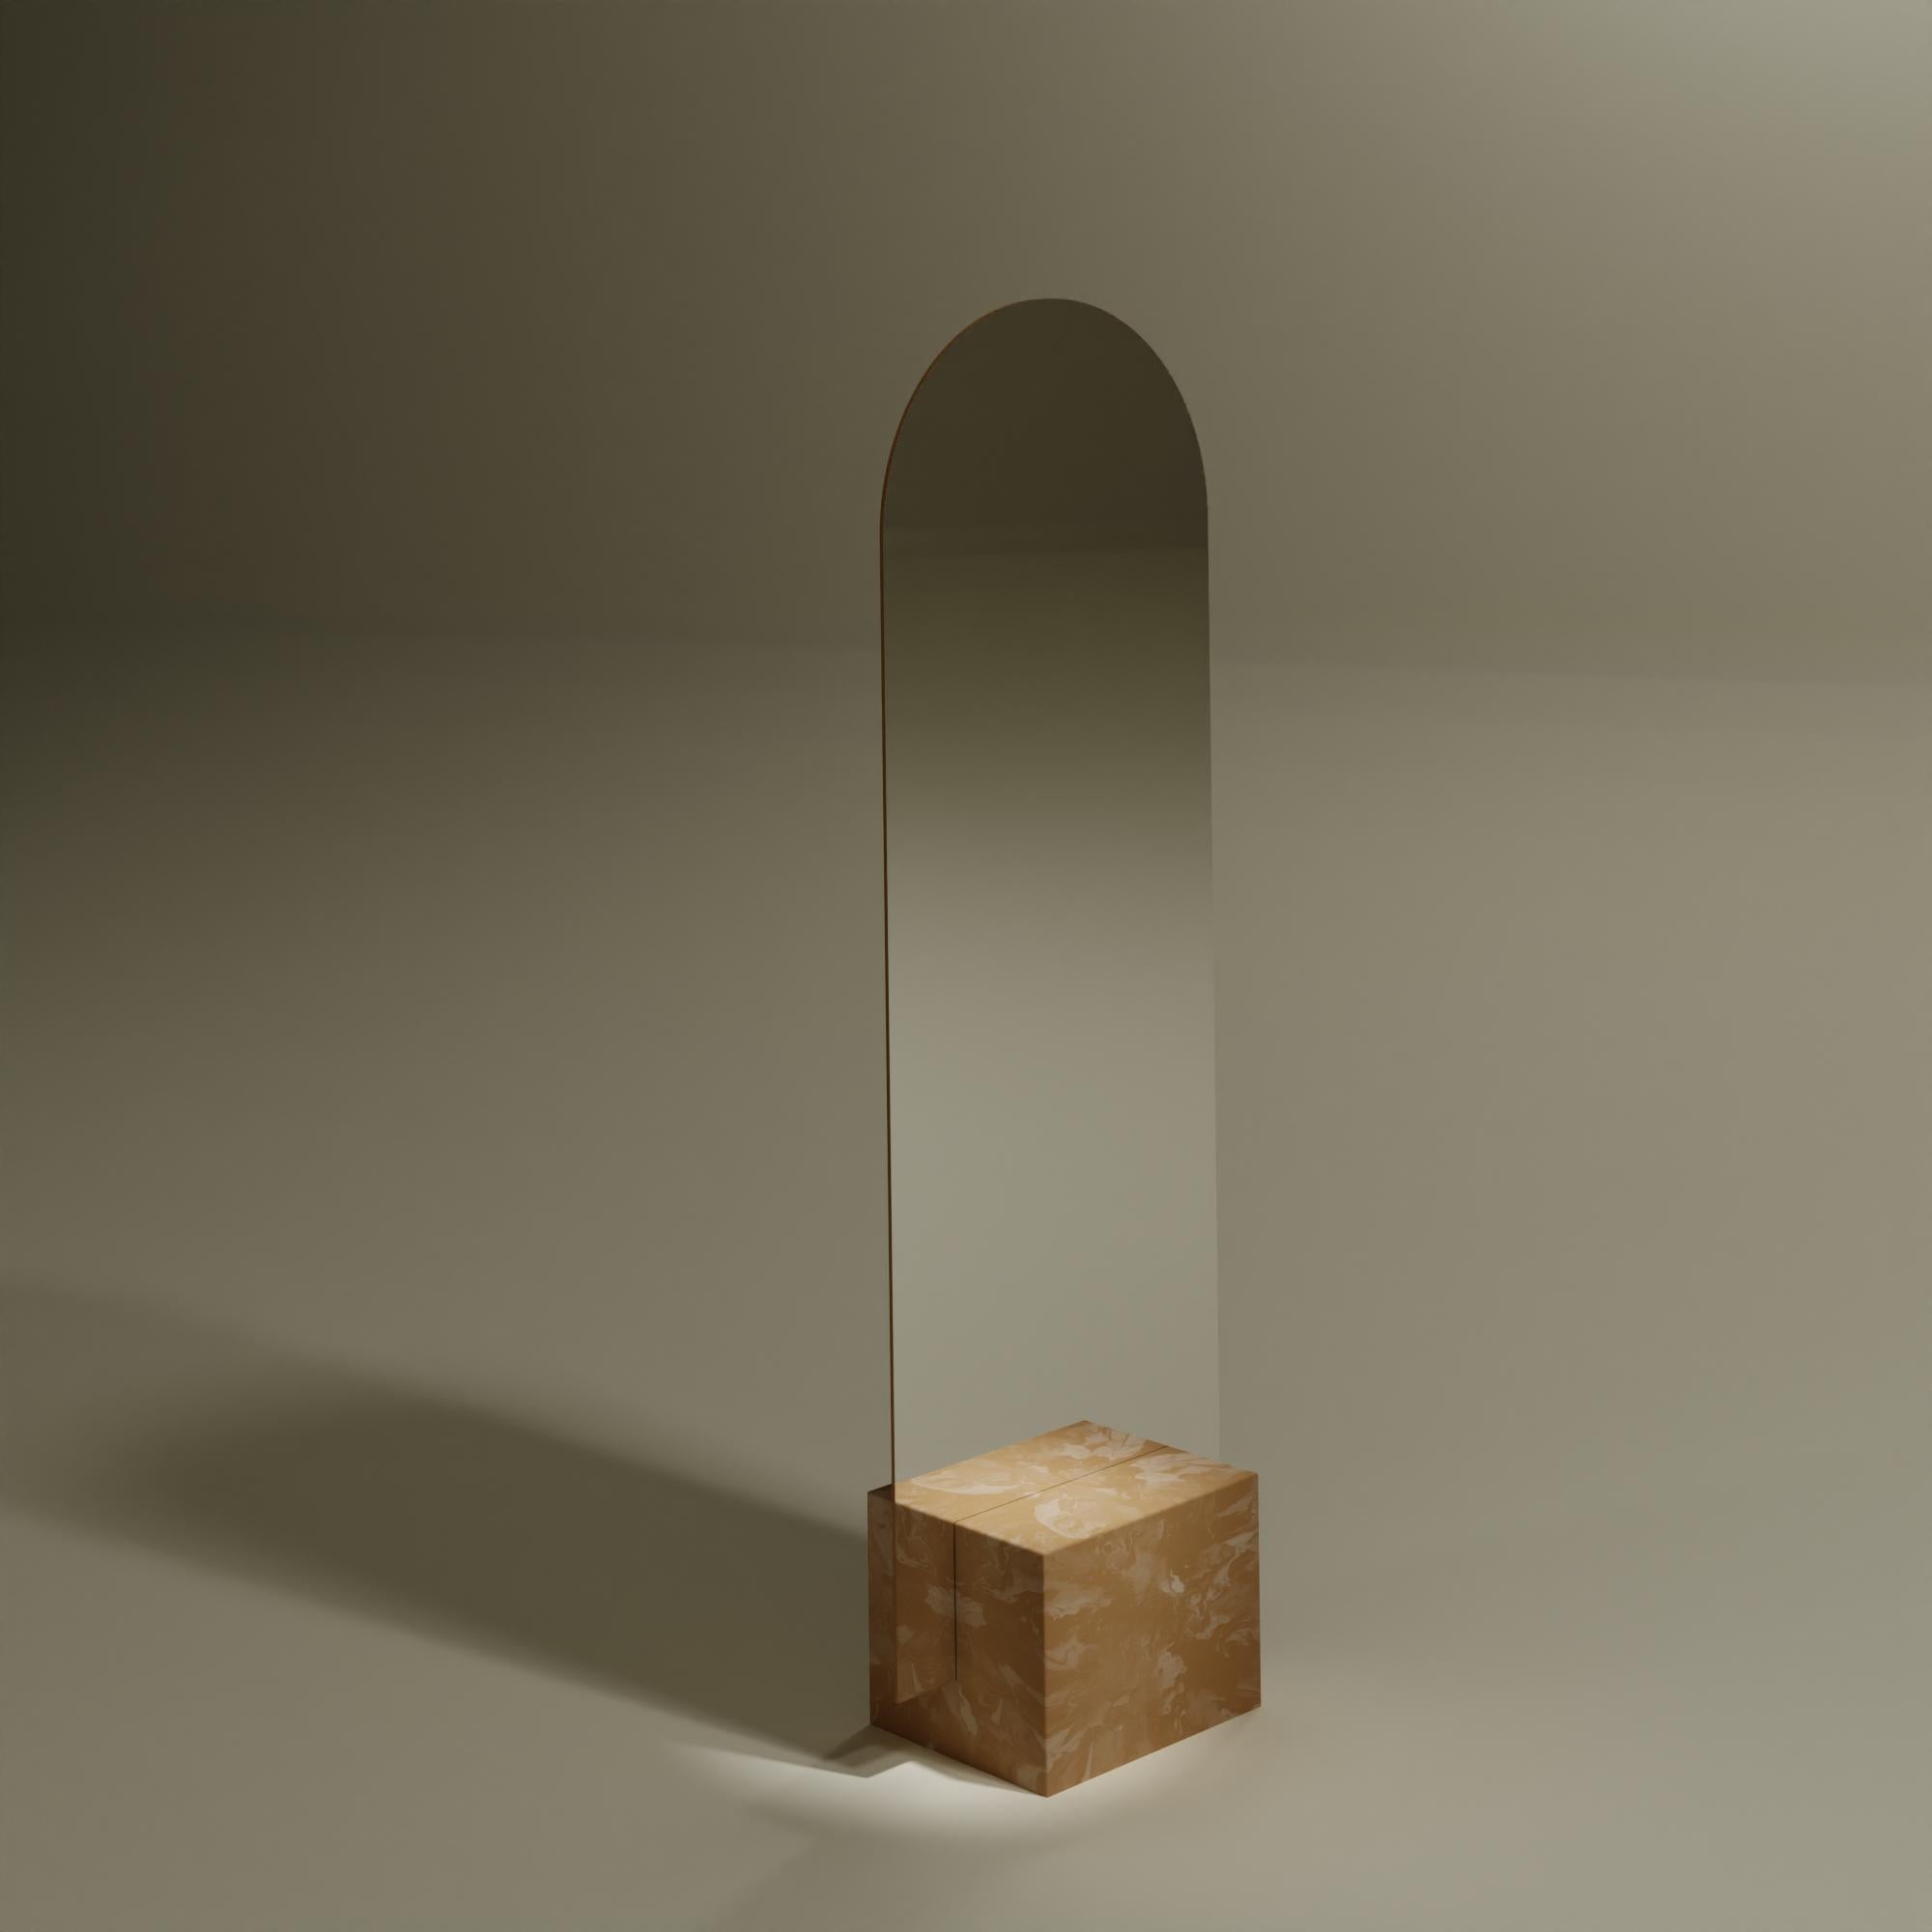 Contemporary standing mirror handcrafted from 100% Recycled Plastic by Anqa Studios / Iced Coffee Brown
With its stone-like bottom and the fragile seeming top part Silhouette, the ANQA Moonrise mirror is a modern confluence of both art and function.